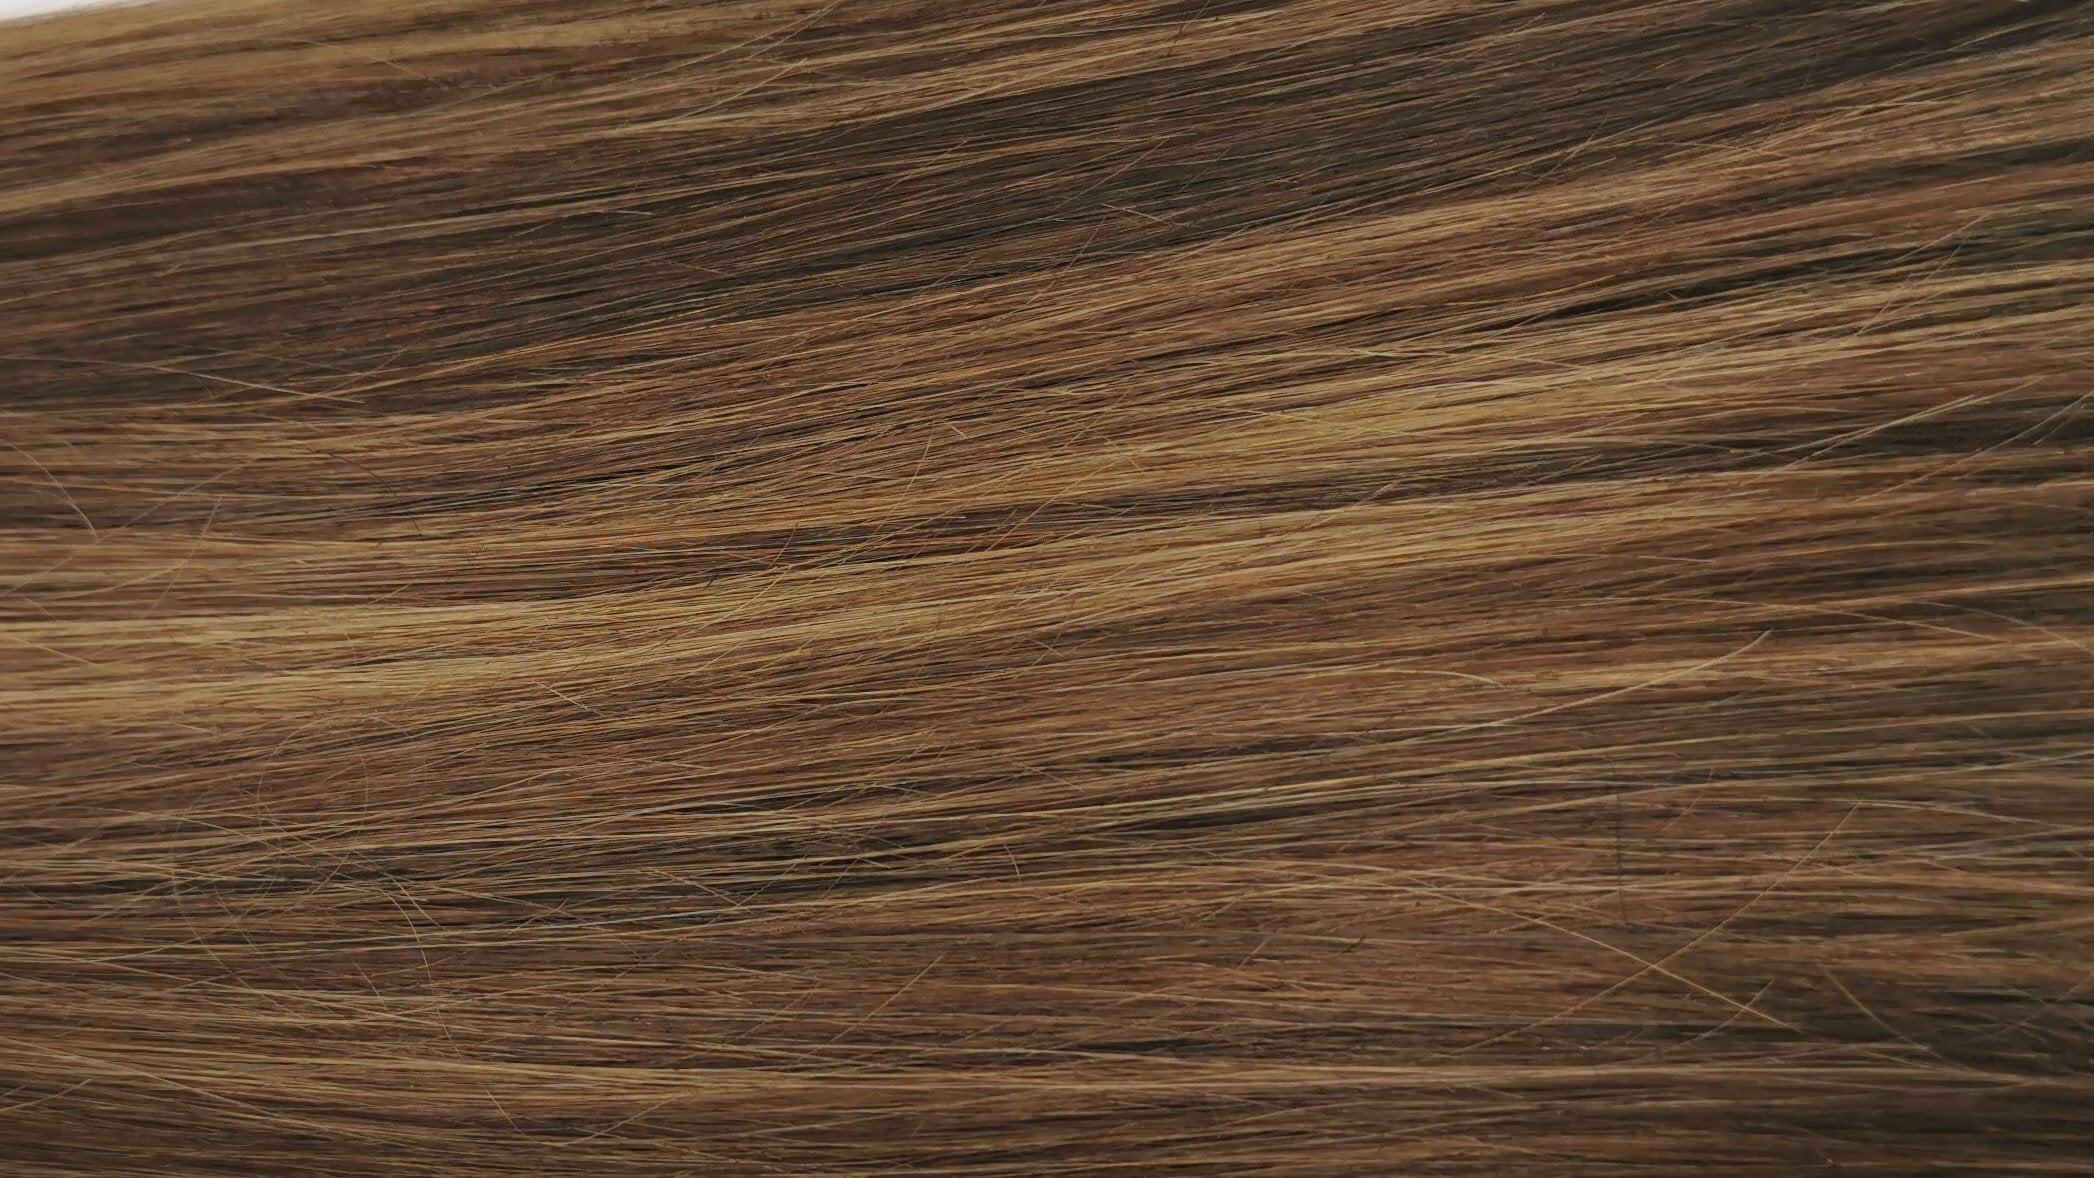 Rania Hand Tied Weft Extensions - Highlighted Mocha Queen 50g - Creata Beauty - Professional Beauty Products